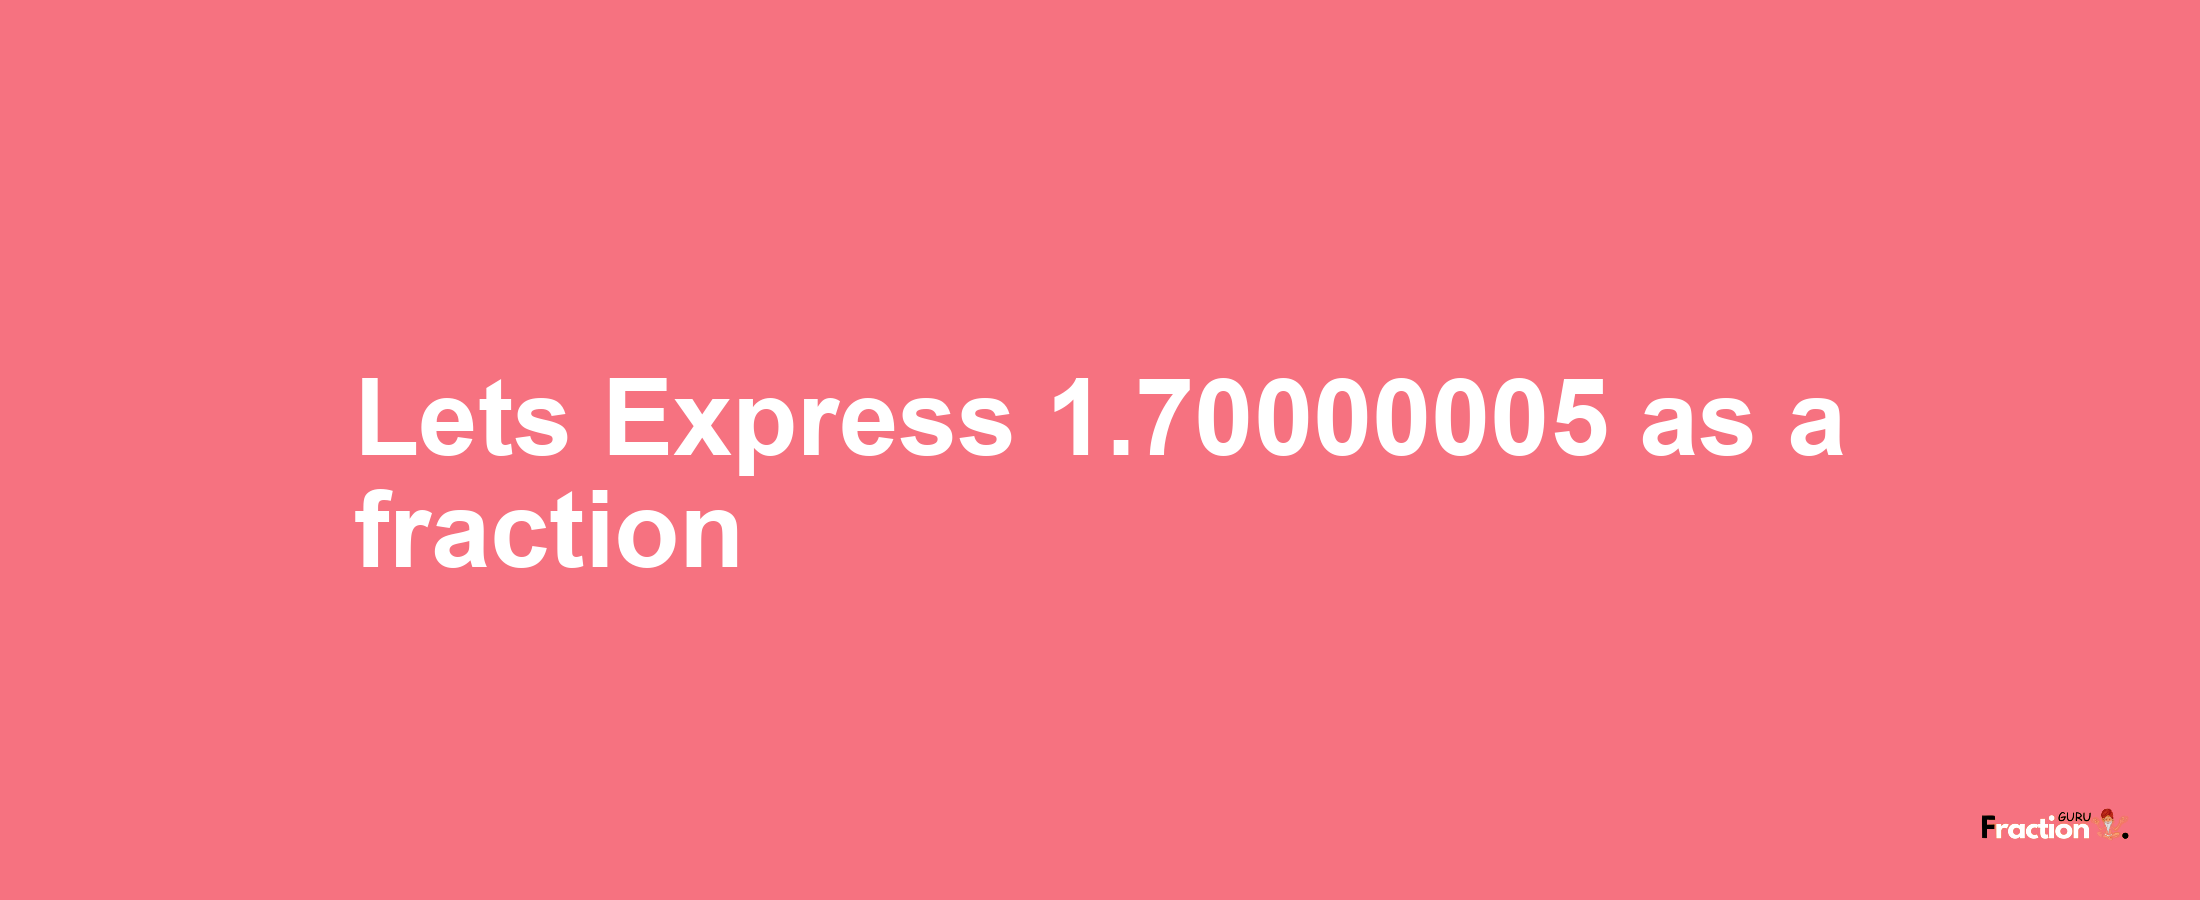 Lets Express 1.70000005 as afraction